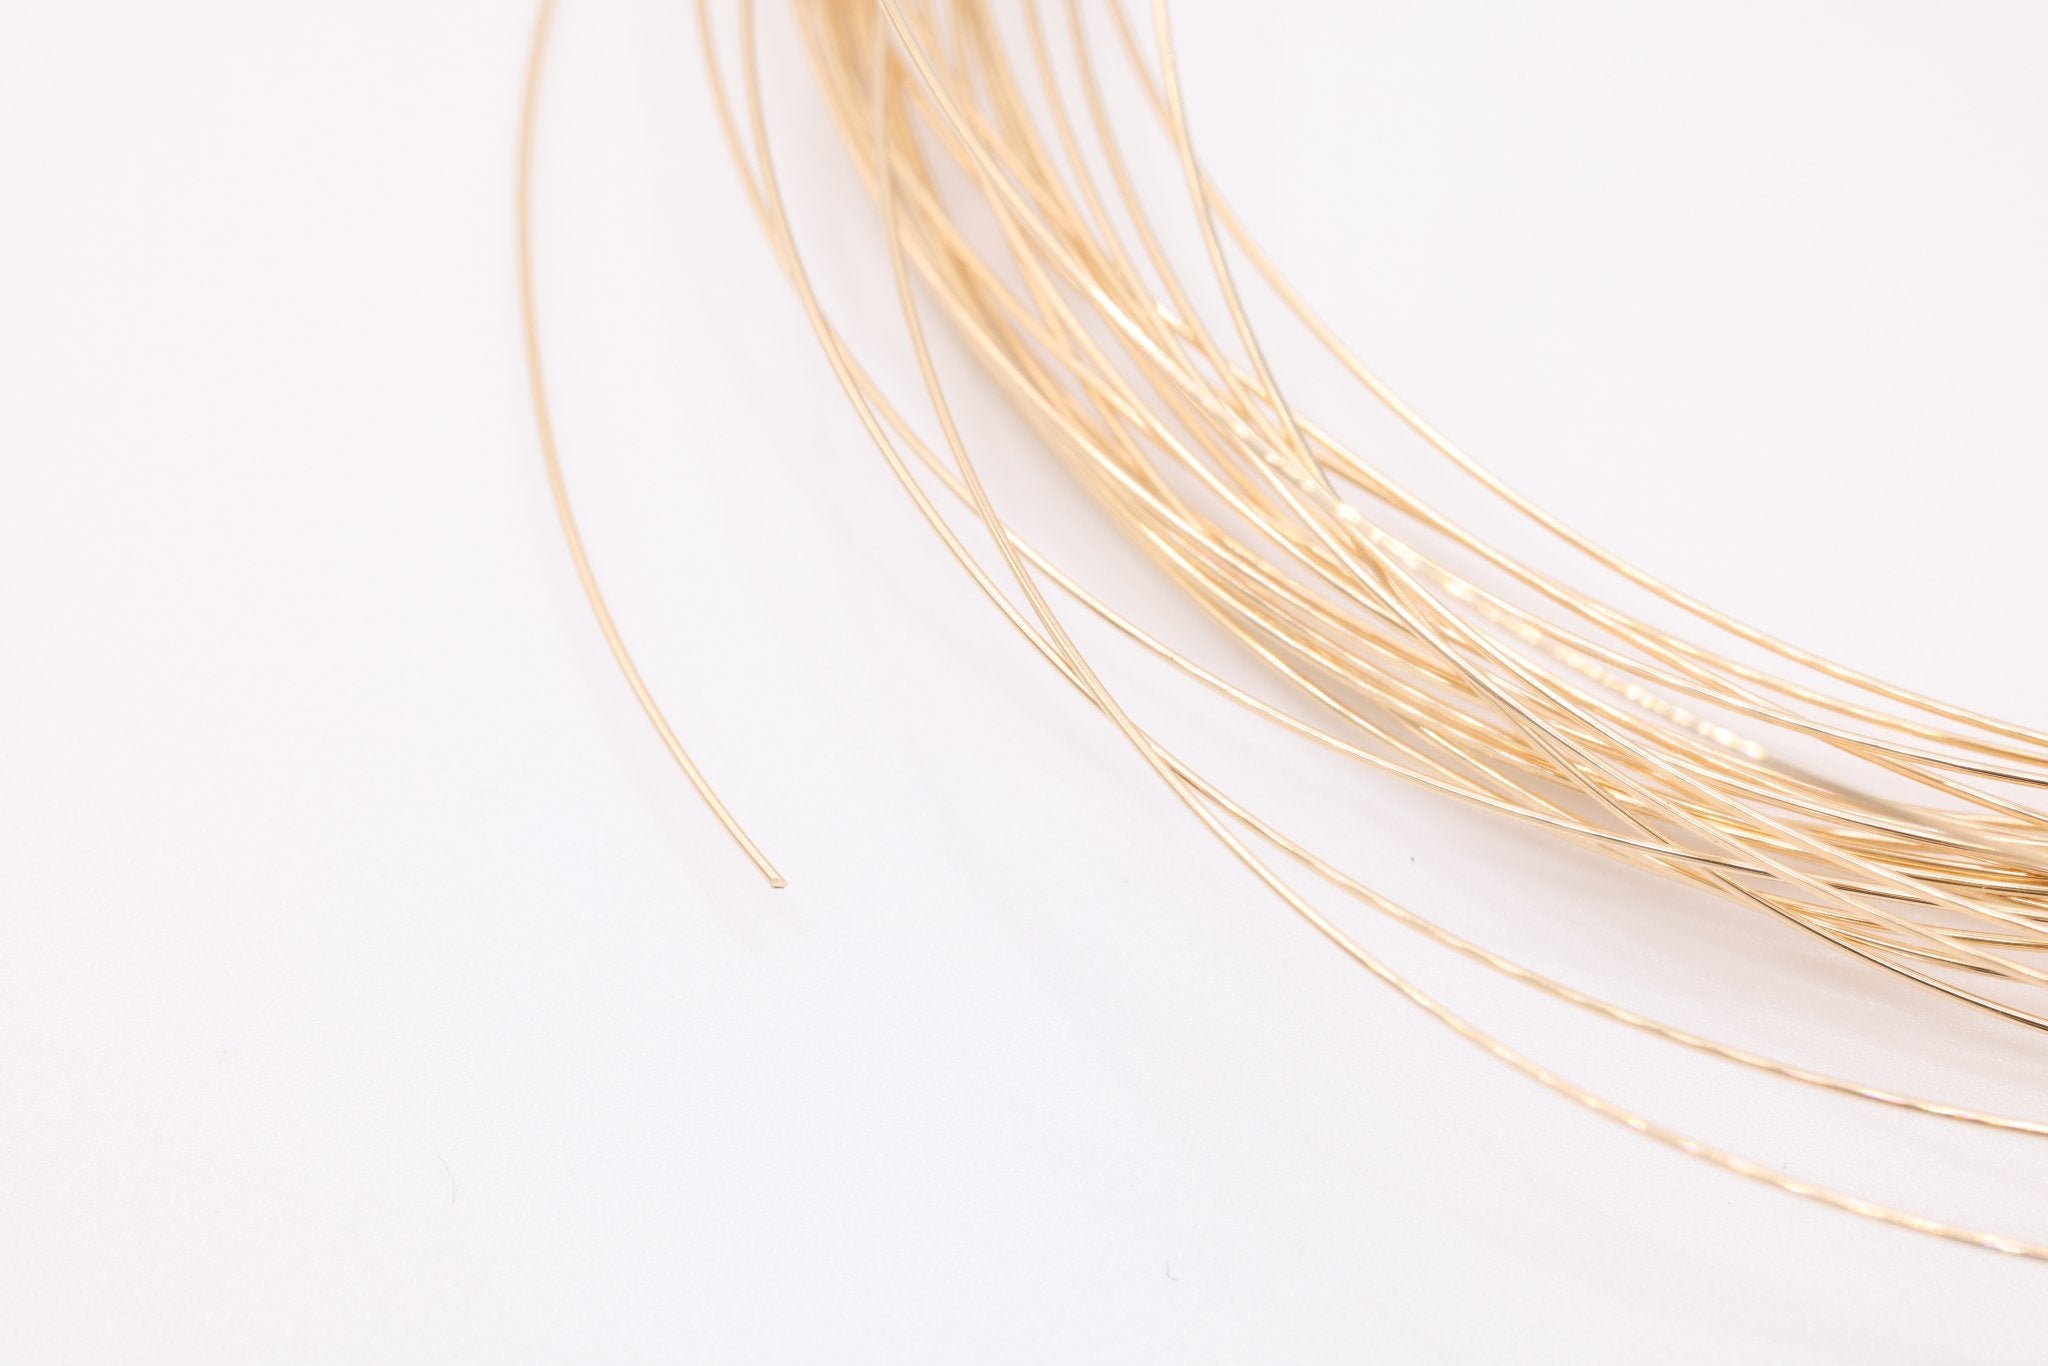 14k Gold Filled Wire, 16 Gauge 1.27mm, Gold Wire, Half Hard Jewelry Wire - HarperCrown